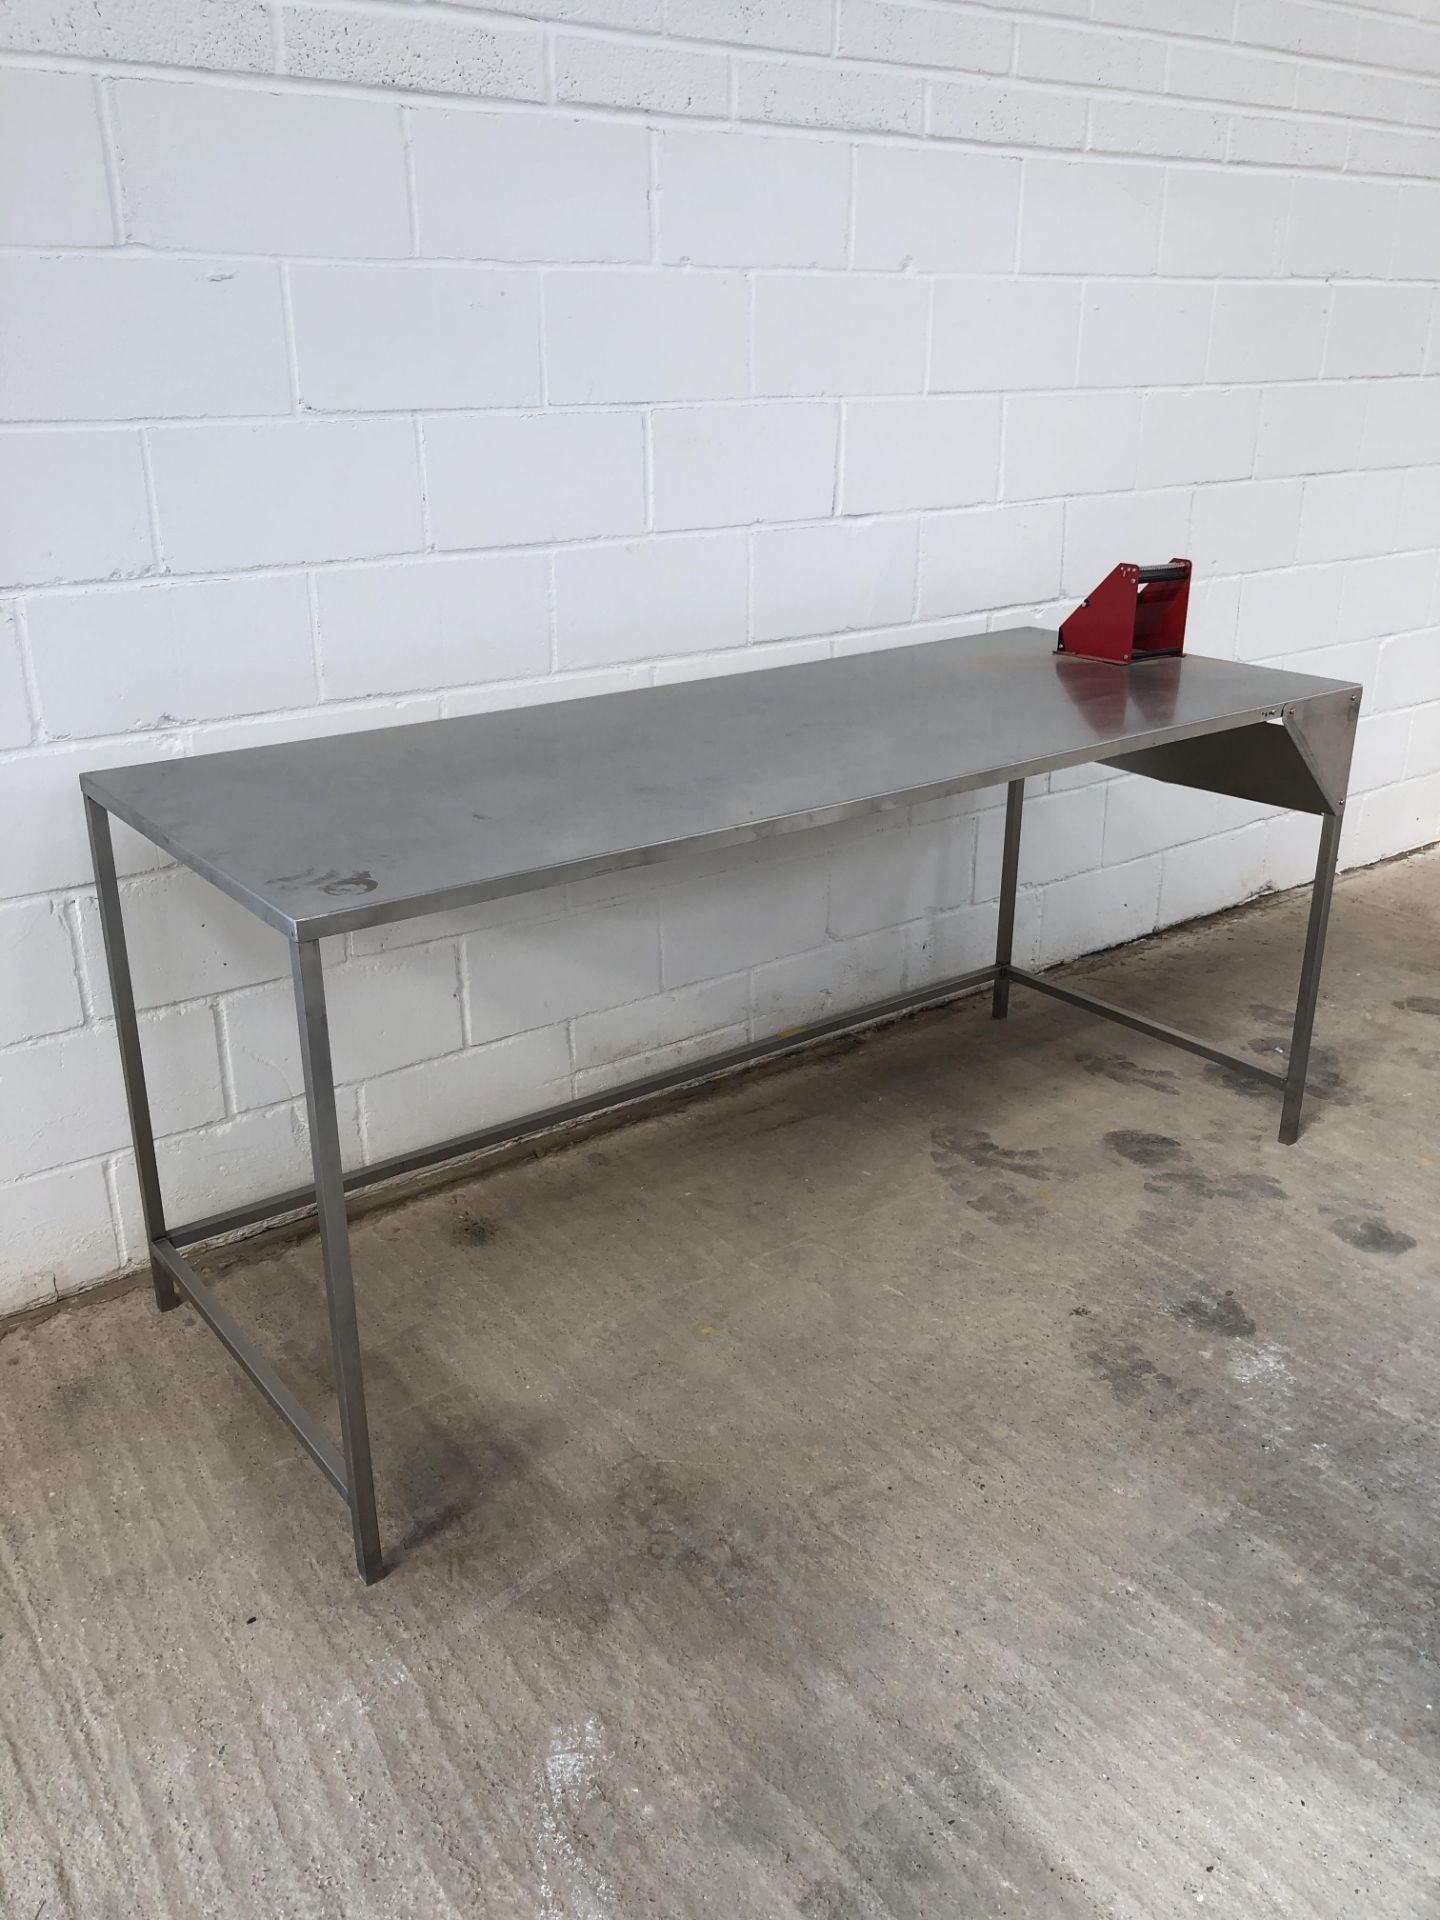 Stainless Steel Work Bench (Dims 200 cm x 80 cm x 91cm) - Image 3 of 3